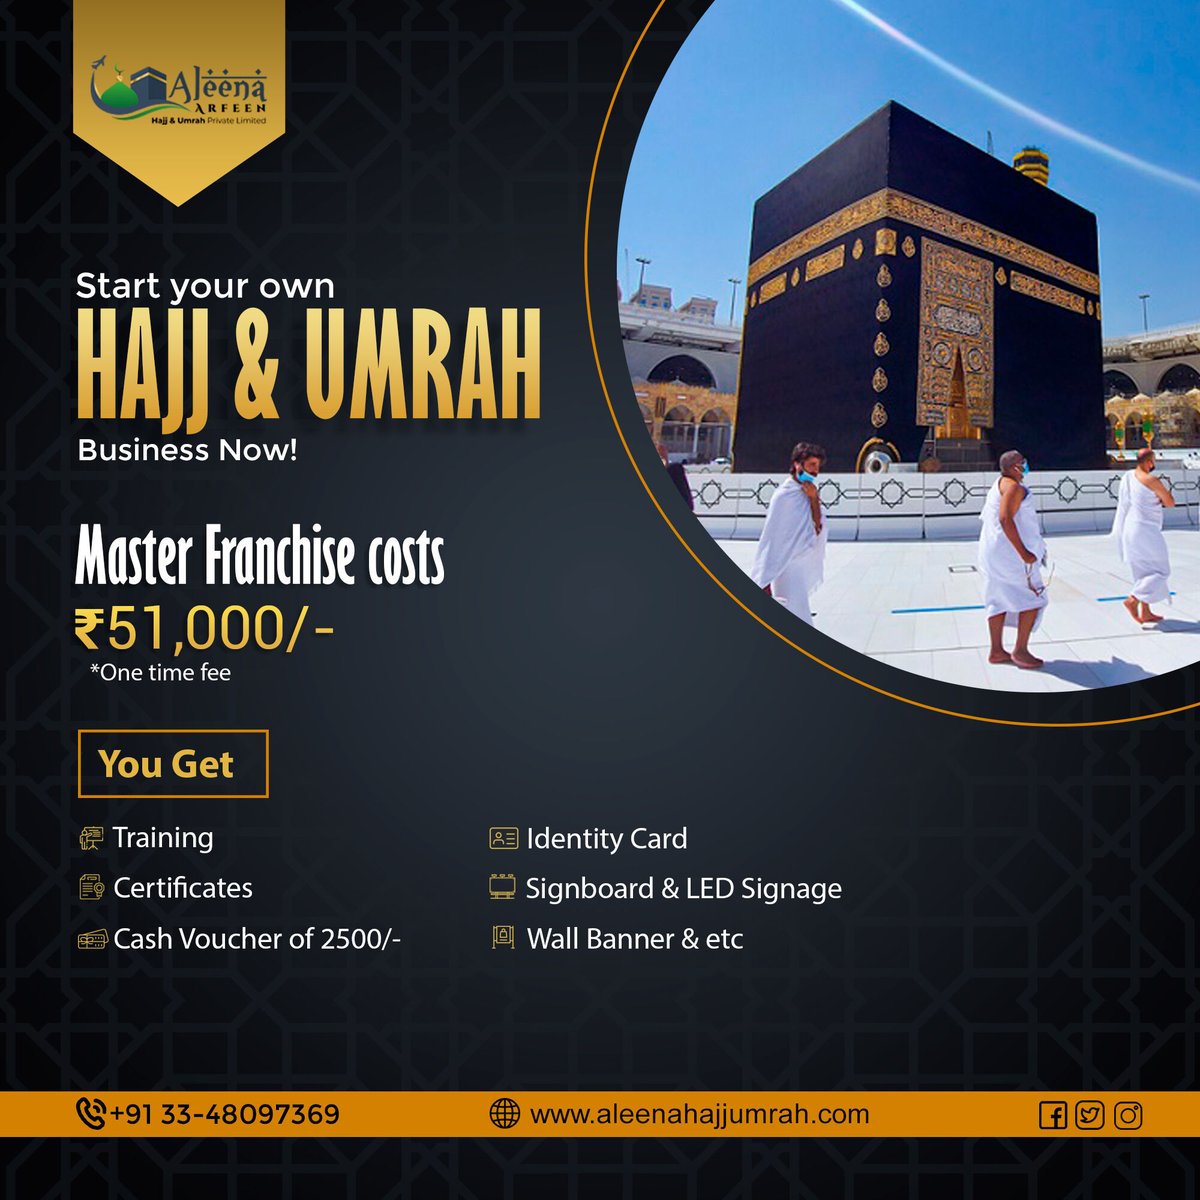 Turn your vision into reality by establishing a thriving venture in Hajj & Umrah travels. Call: +91 33-48097369 to kickstart your startup #business #businessowners #BusinessFranchise #franchise #franchiseopportunities #FranchiseBusiness #franchiseowner  #aleenaarfeenhajjandumrah